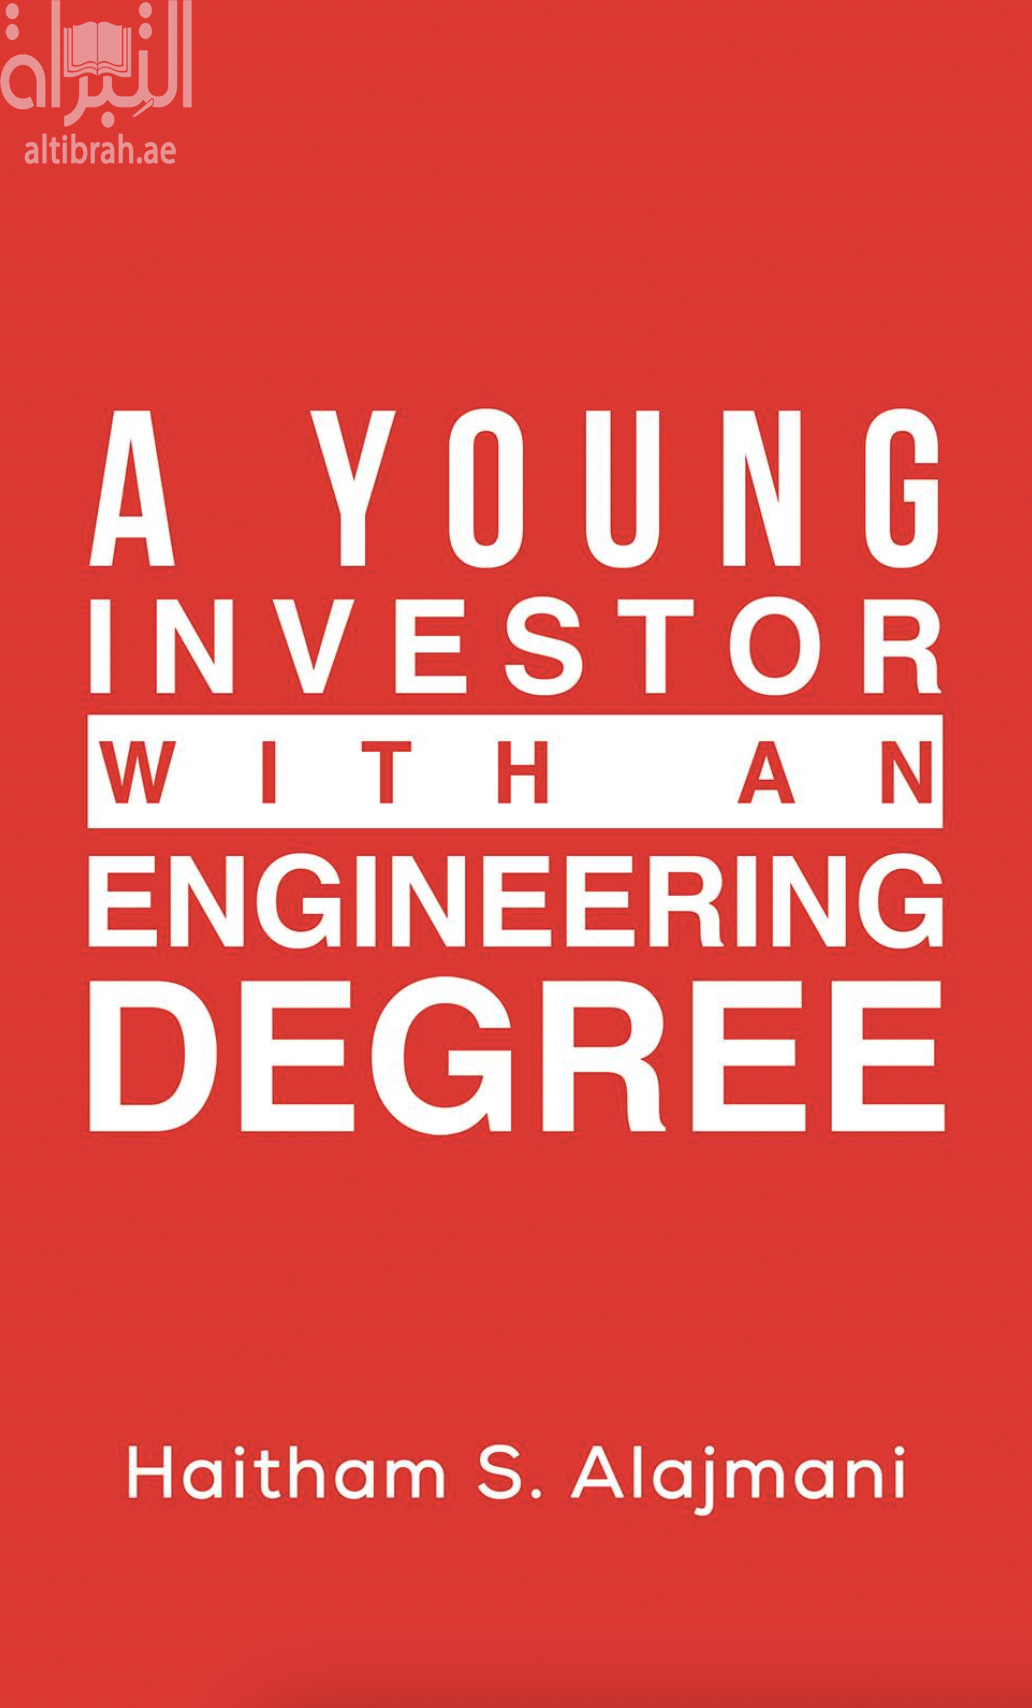 A Young Investor with an Engineering Degree